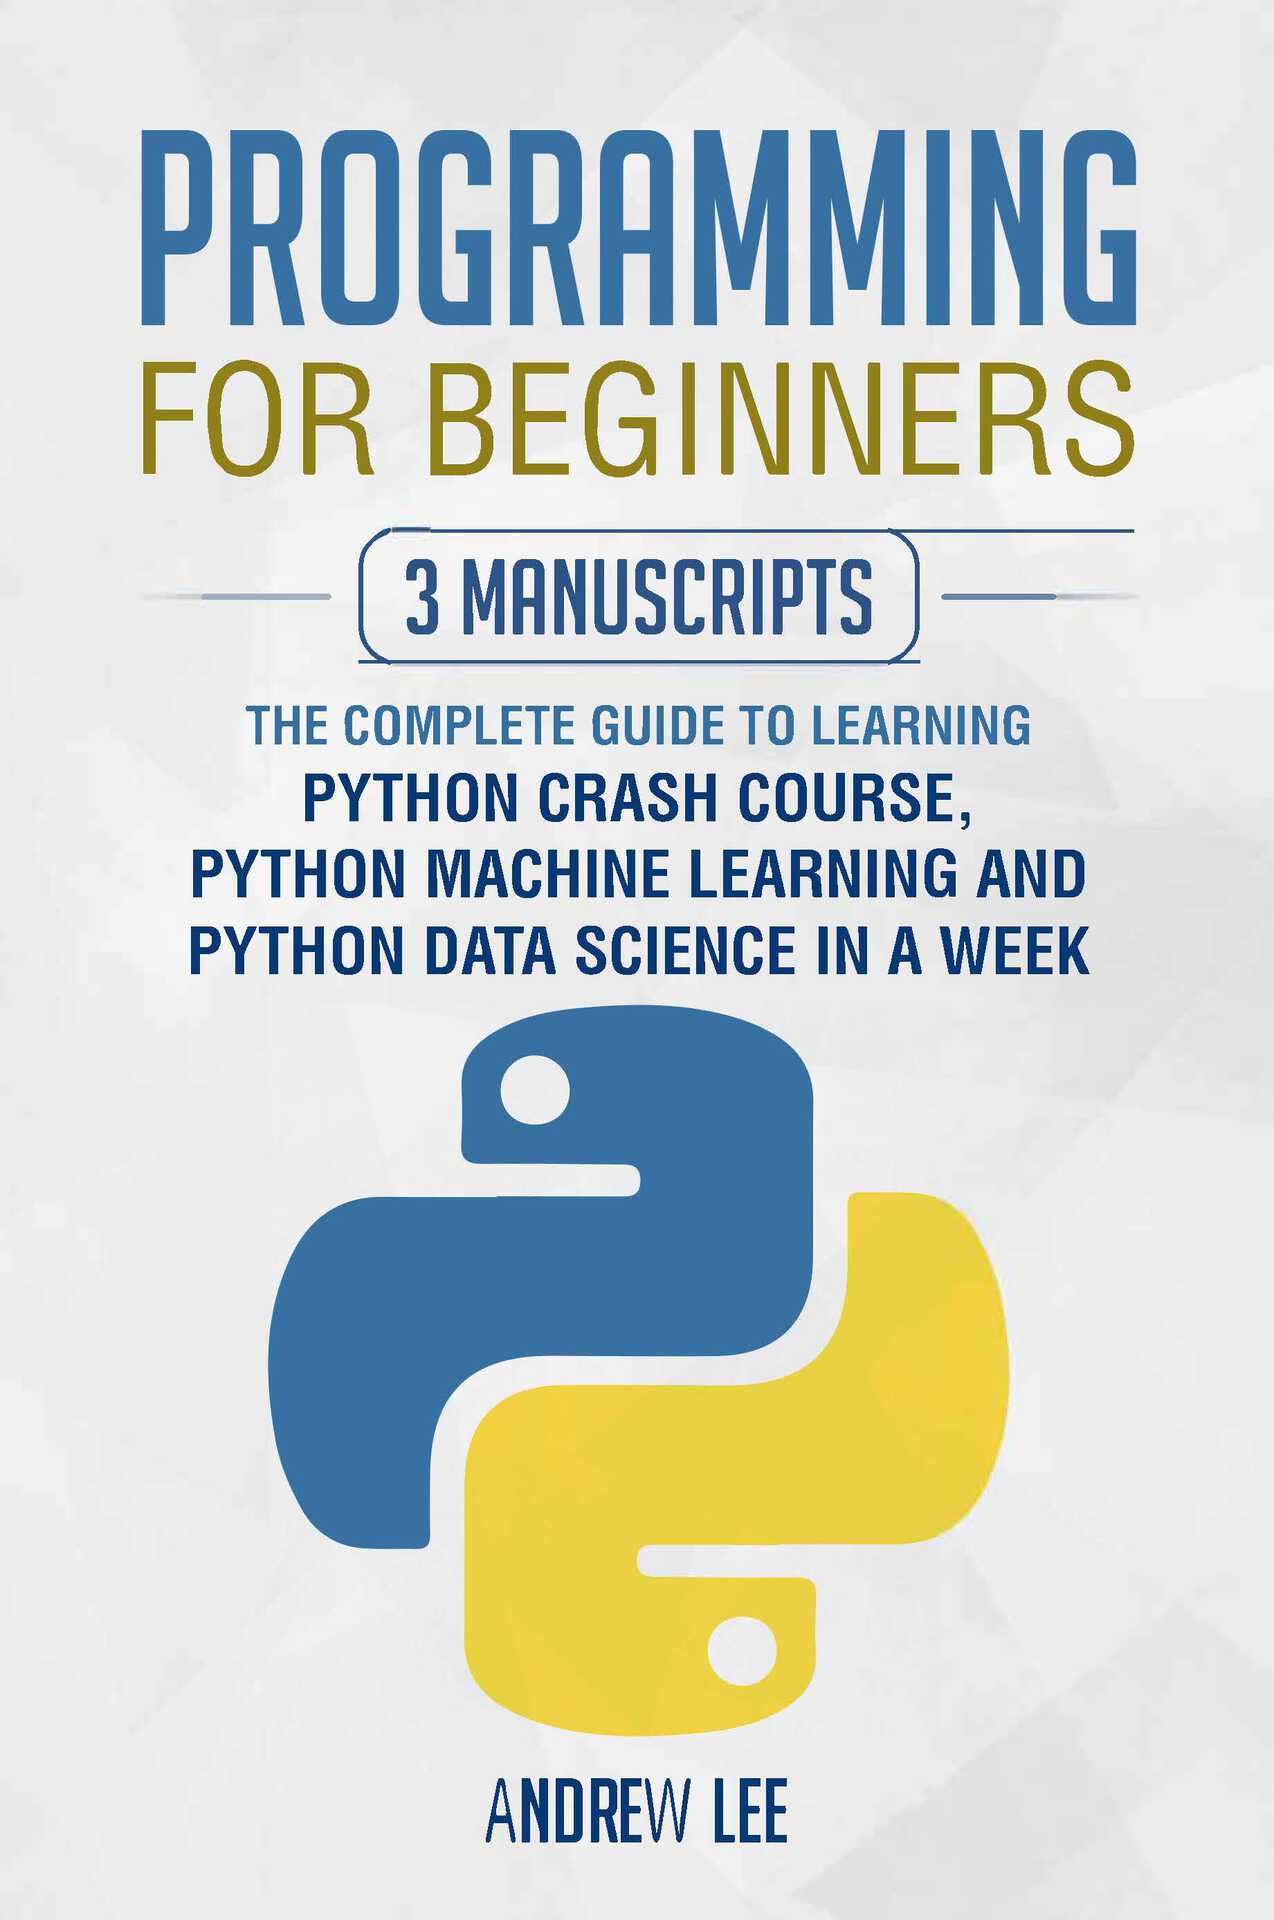 Programming for Beginners: 3 Manuscripts: The Complete Guide to Learning Python Crash Course, Python Machine Learning and Python Data Science in a Week